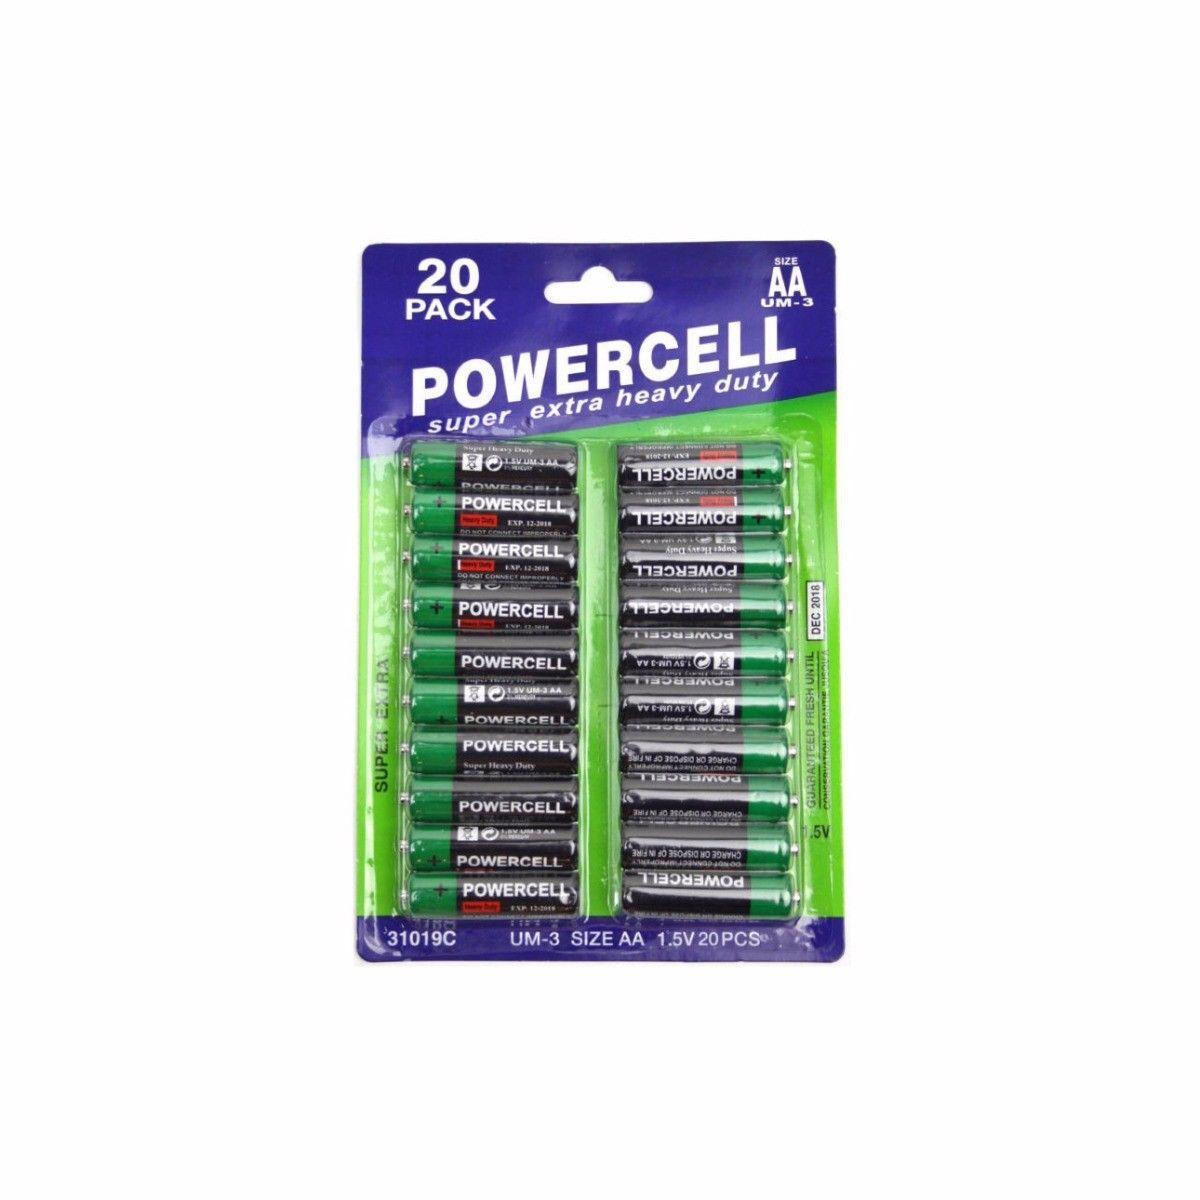 20 Powercell AA Zinc Batteries 1.5V UM3 Extra Heavy Duty 0012 (Parcel Rate)